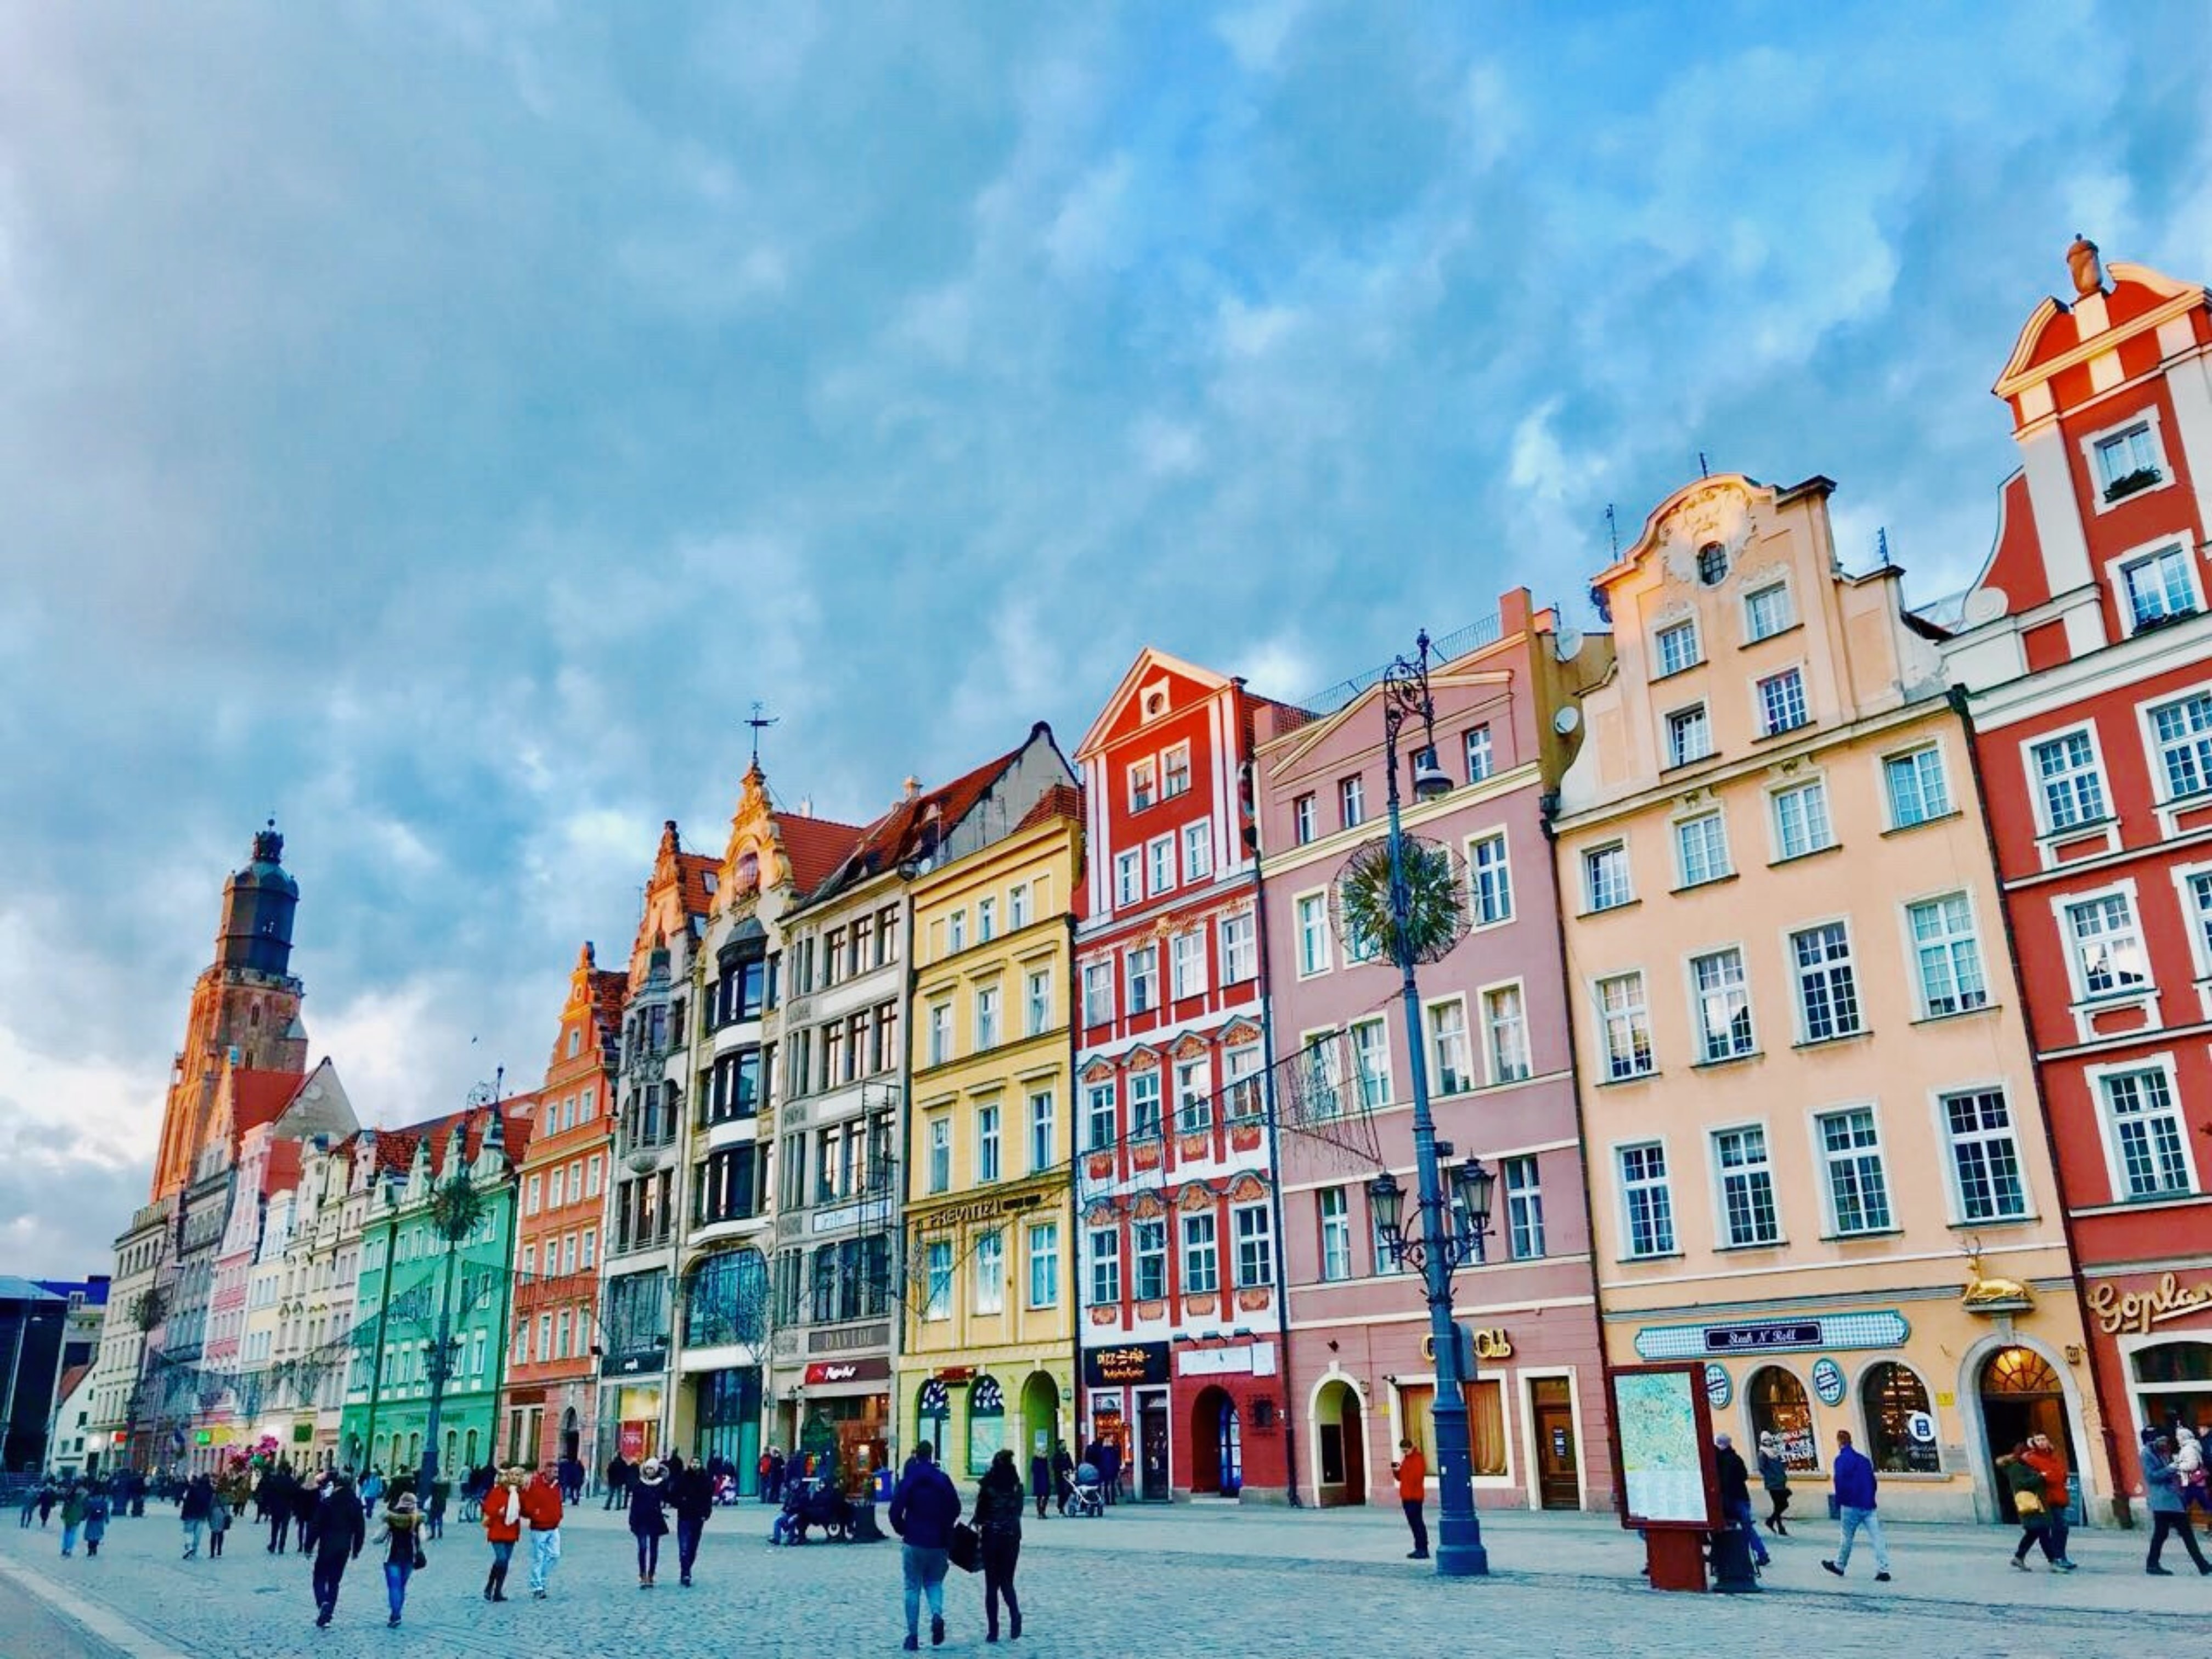 Colourful buildings in Poland.